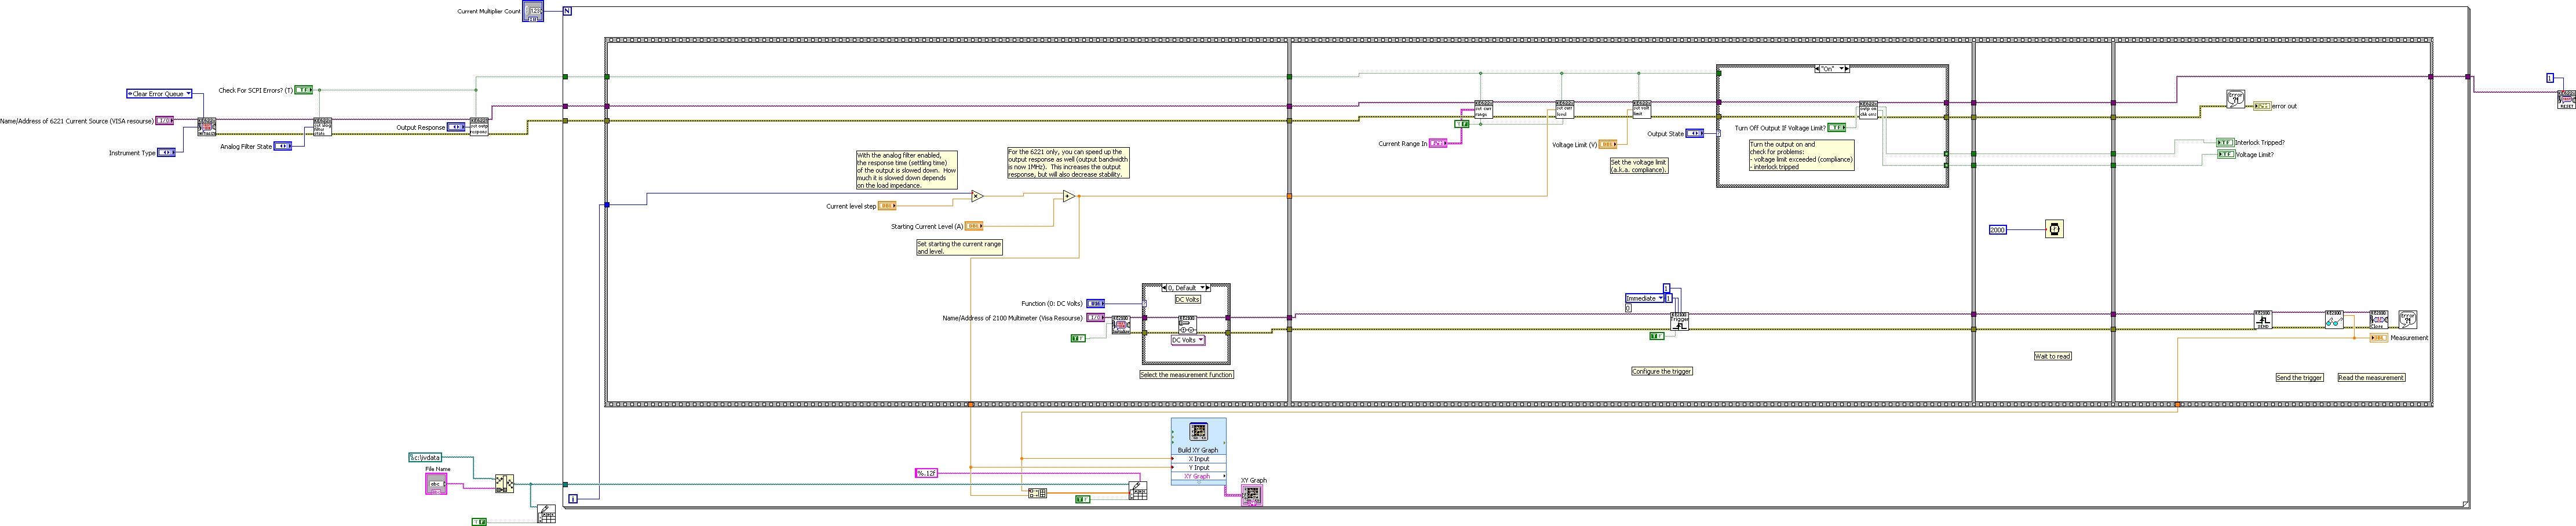 The LabVIEW program which you can see is graphical (VPL). In this graphical program there is input/output, conditionals, and loops. The thin lined box represents a loop in the above image and the thicker lined boxes are either conditionals (case statements or while loops) or sequence structures.